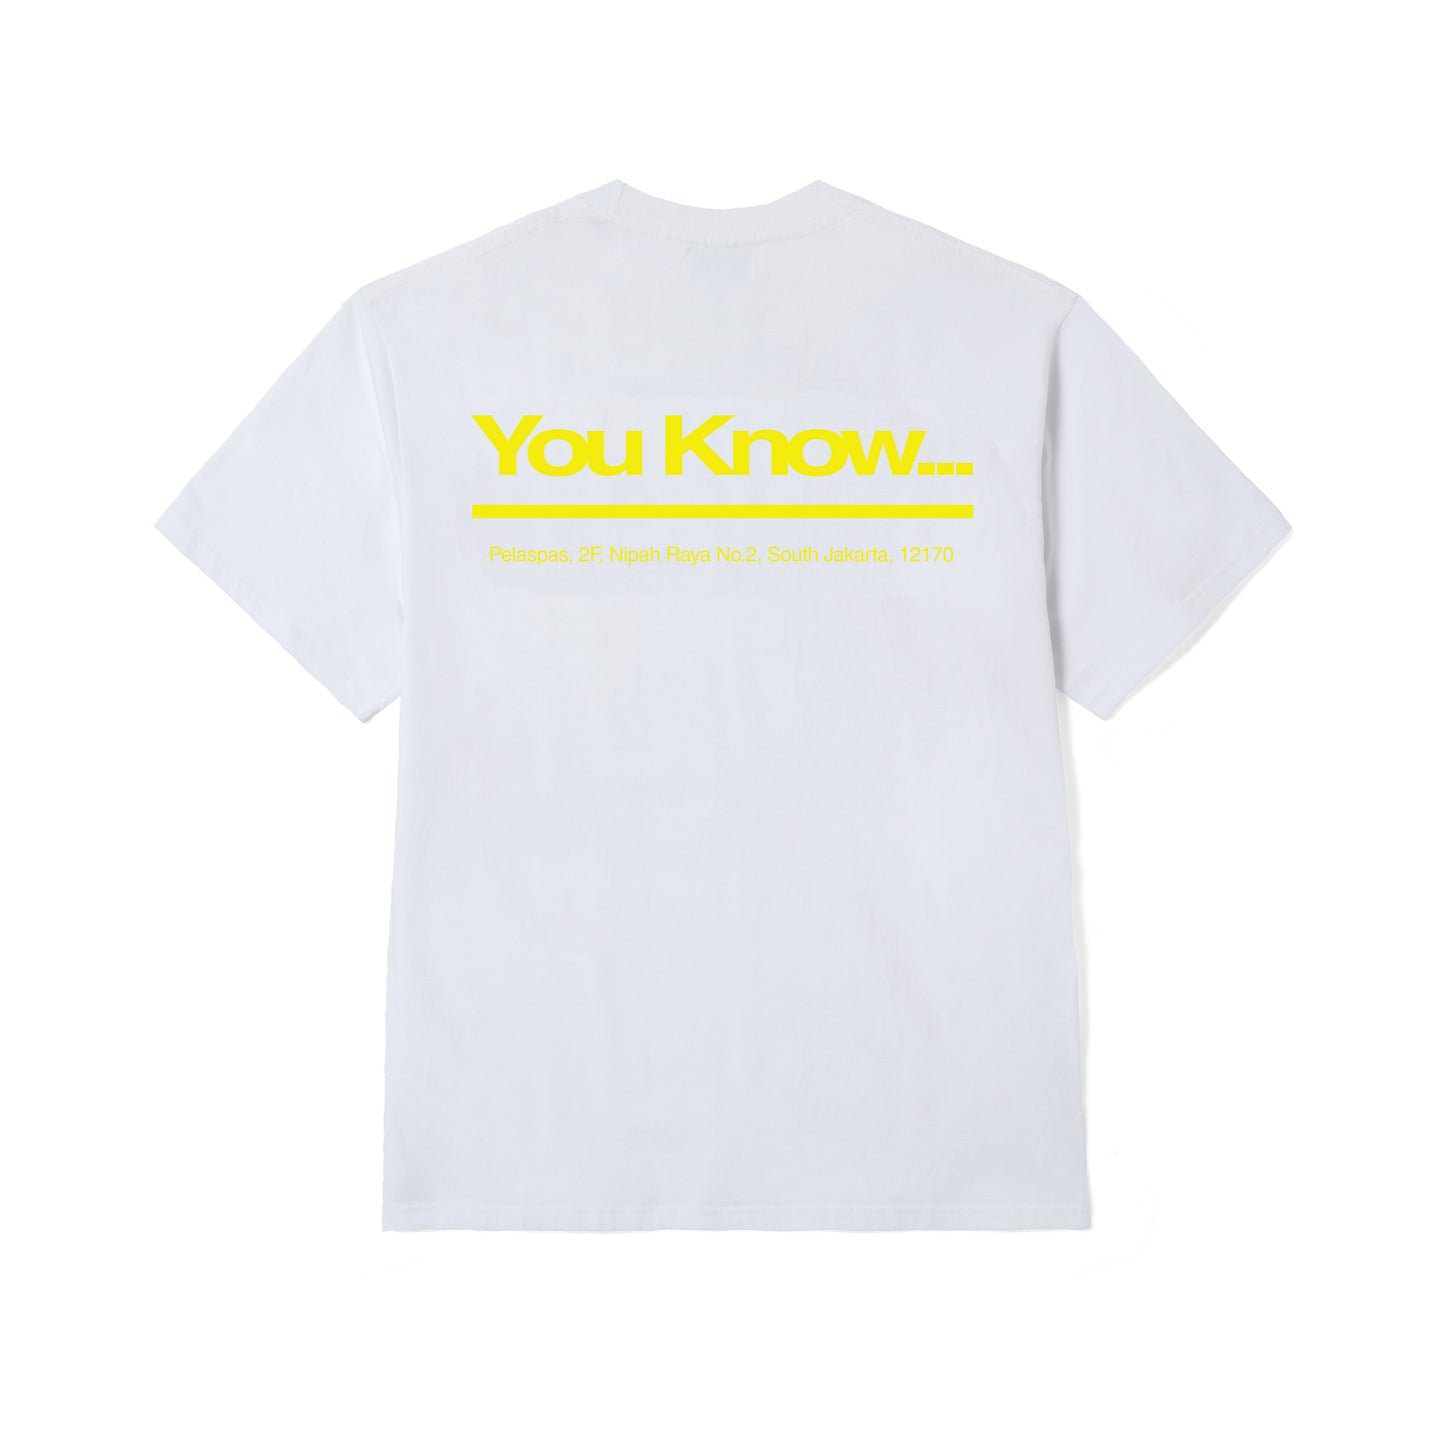 YOU KNOW… WHITE TEE IN YELLOW PRINT